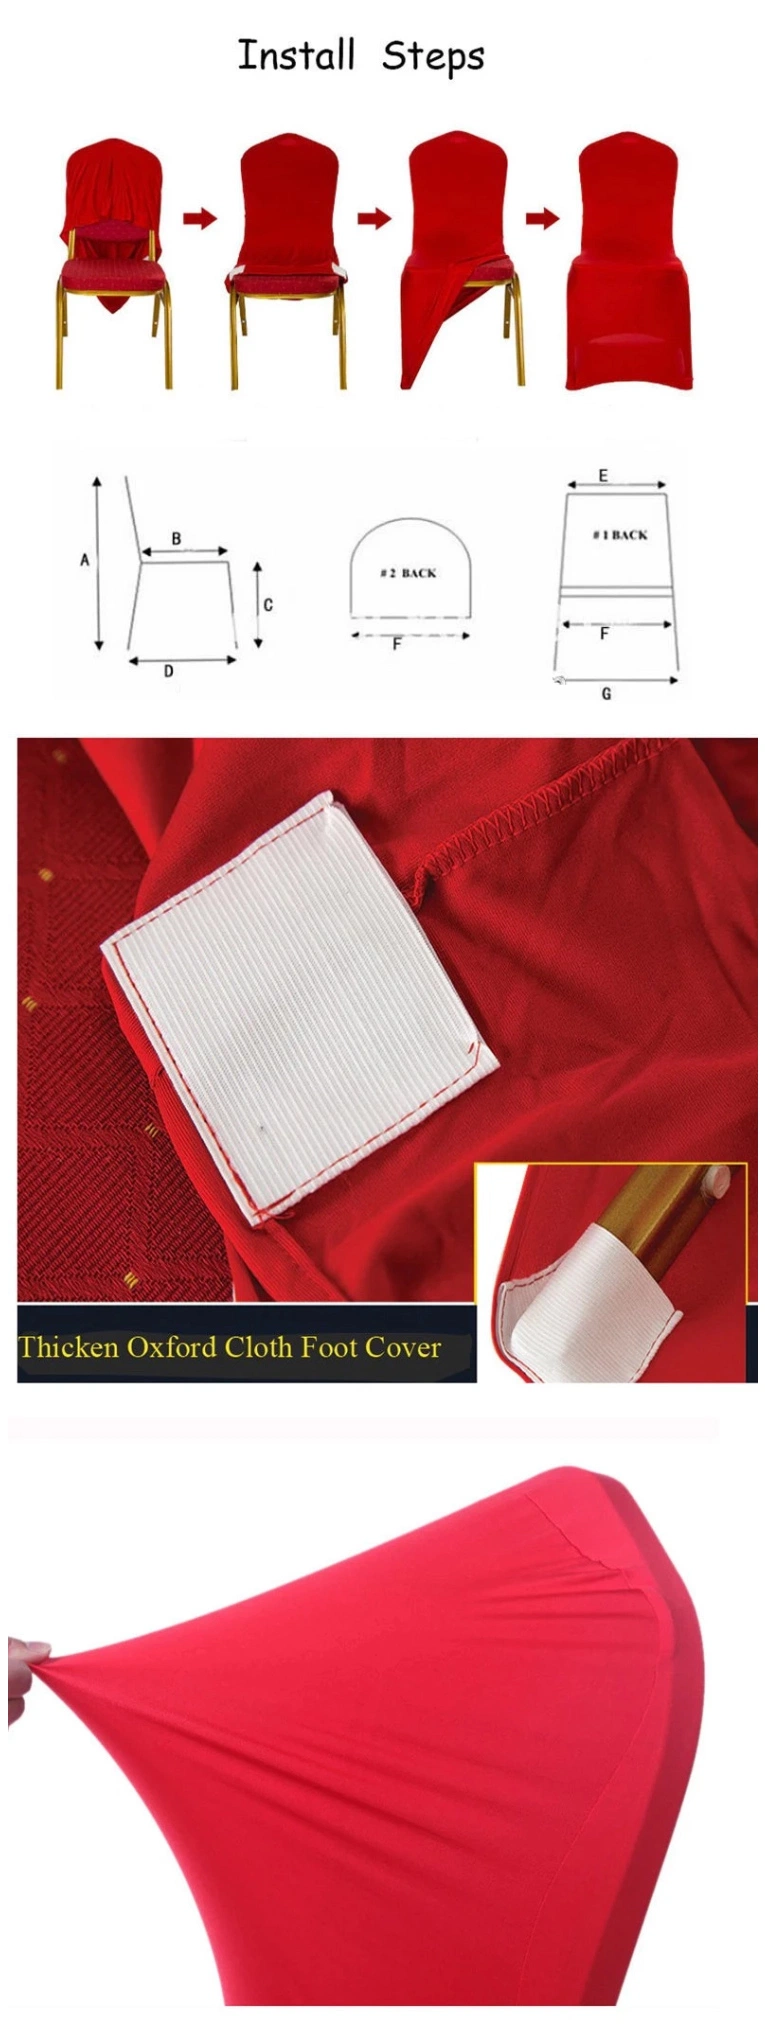 Guangzhou Foshan Matched Stretch Banquet Chair Covers Red Rectangular Stretch Table Cloth for Yrf